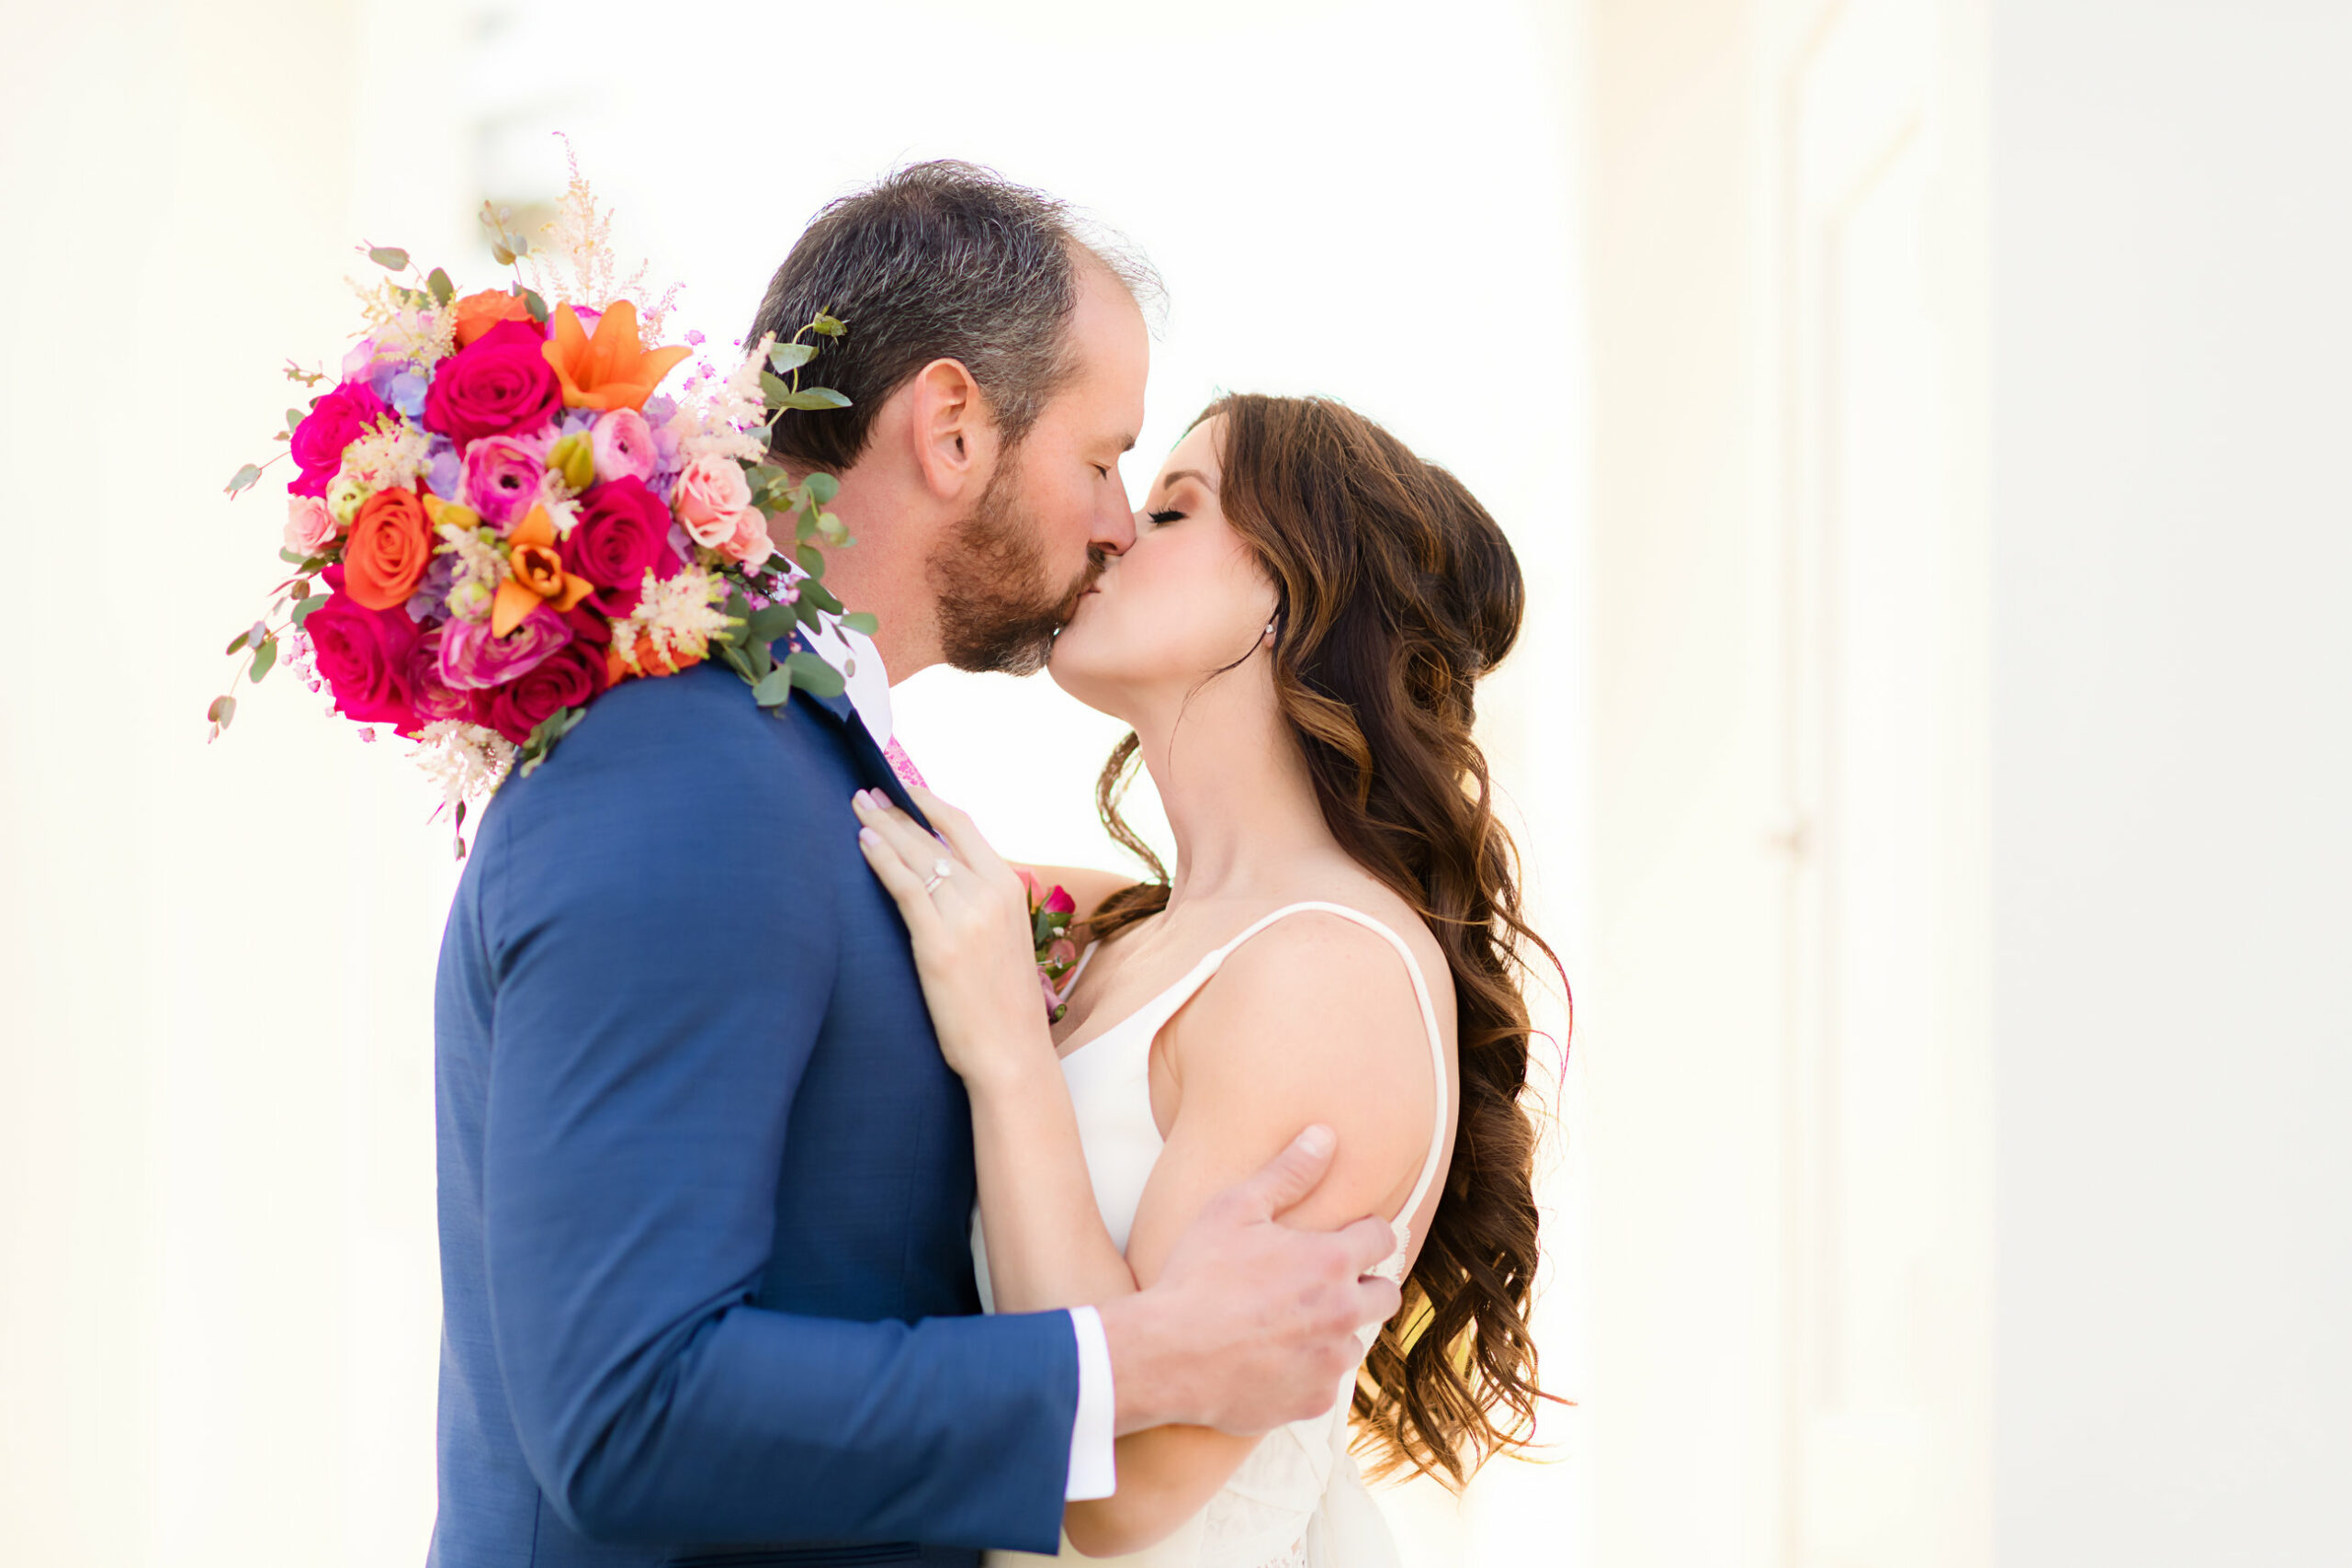 Bride and groom kissing, bride holding brightly colored wedding flowers